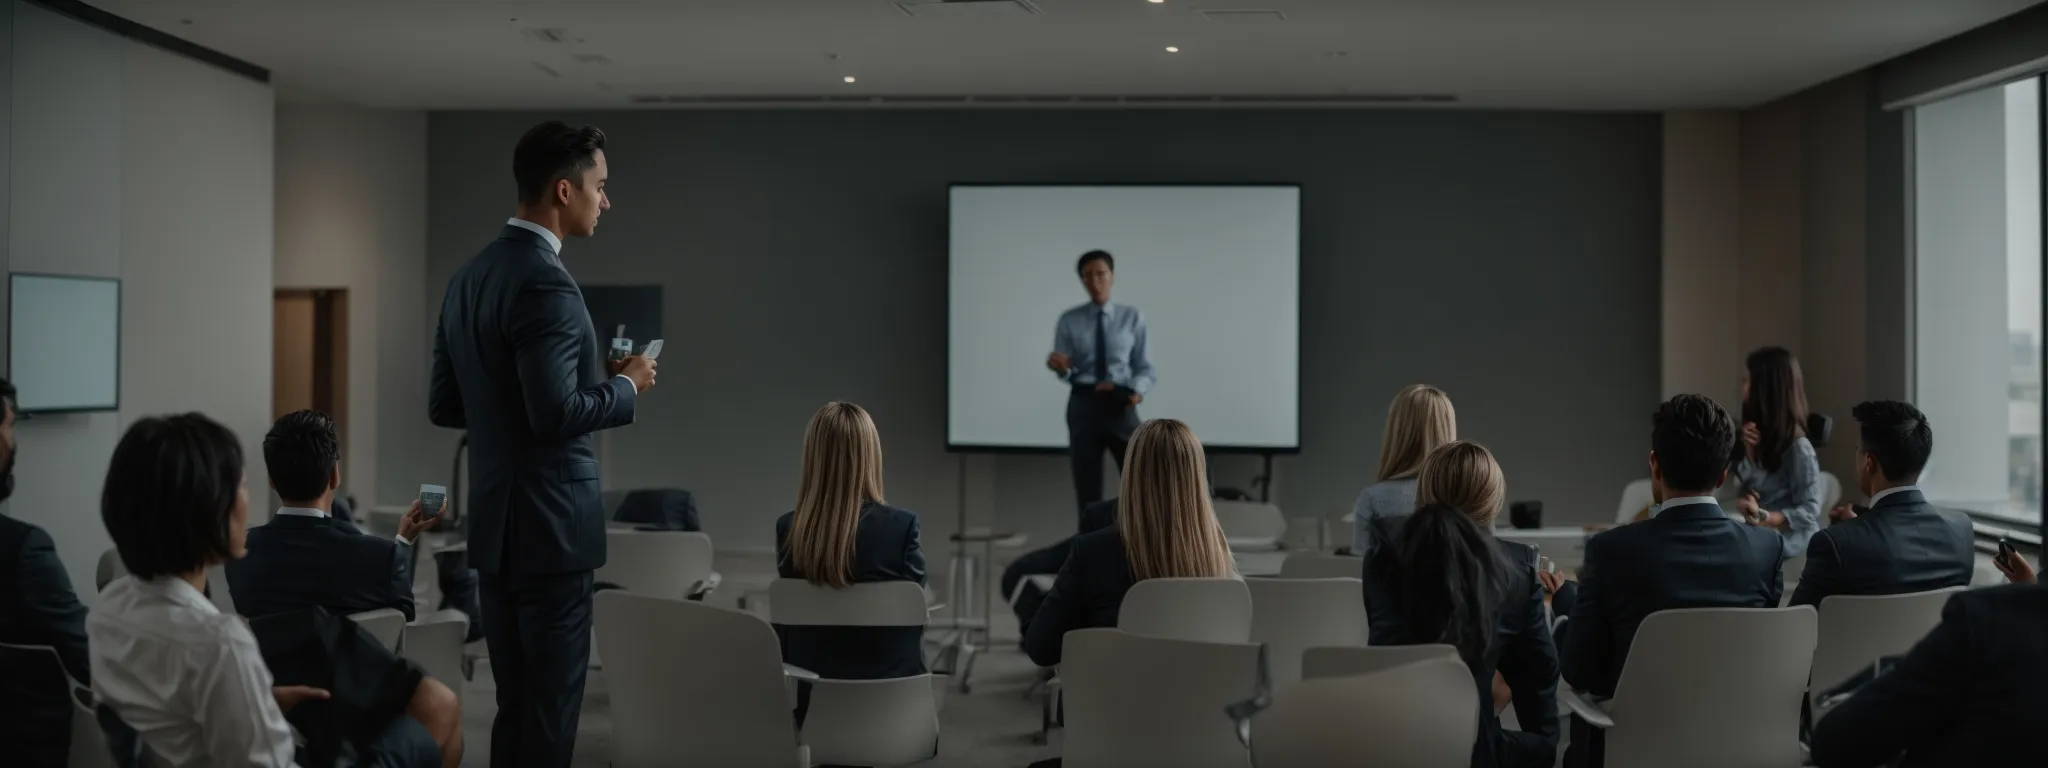 a person giving an engaging presentation to a group of attentive business professionals in a modern meeting room.